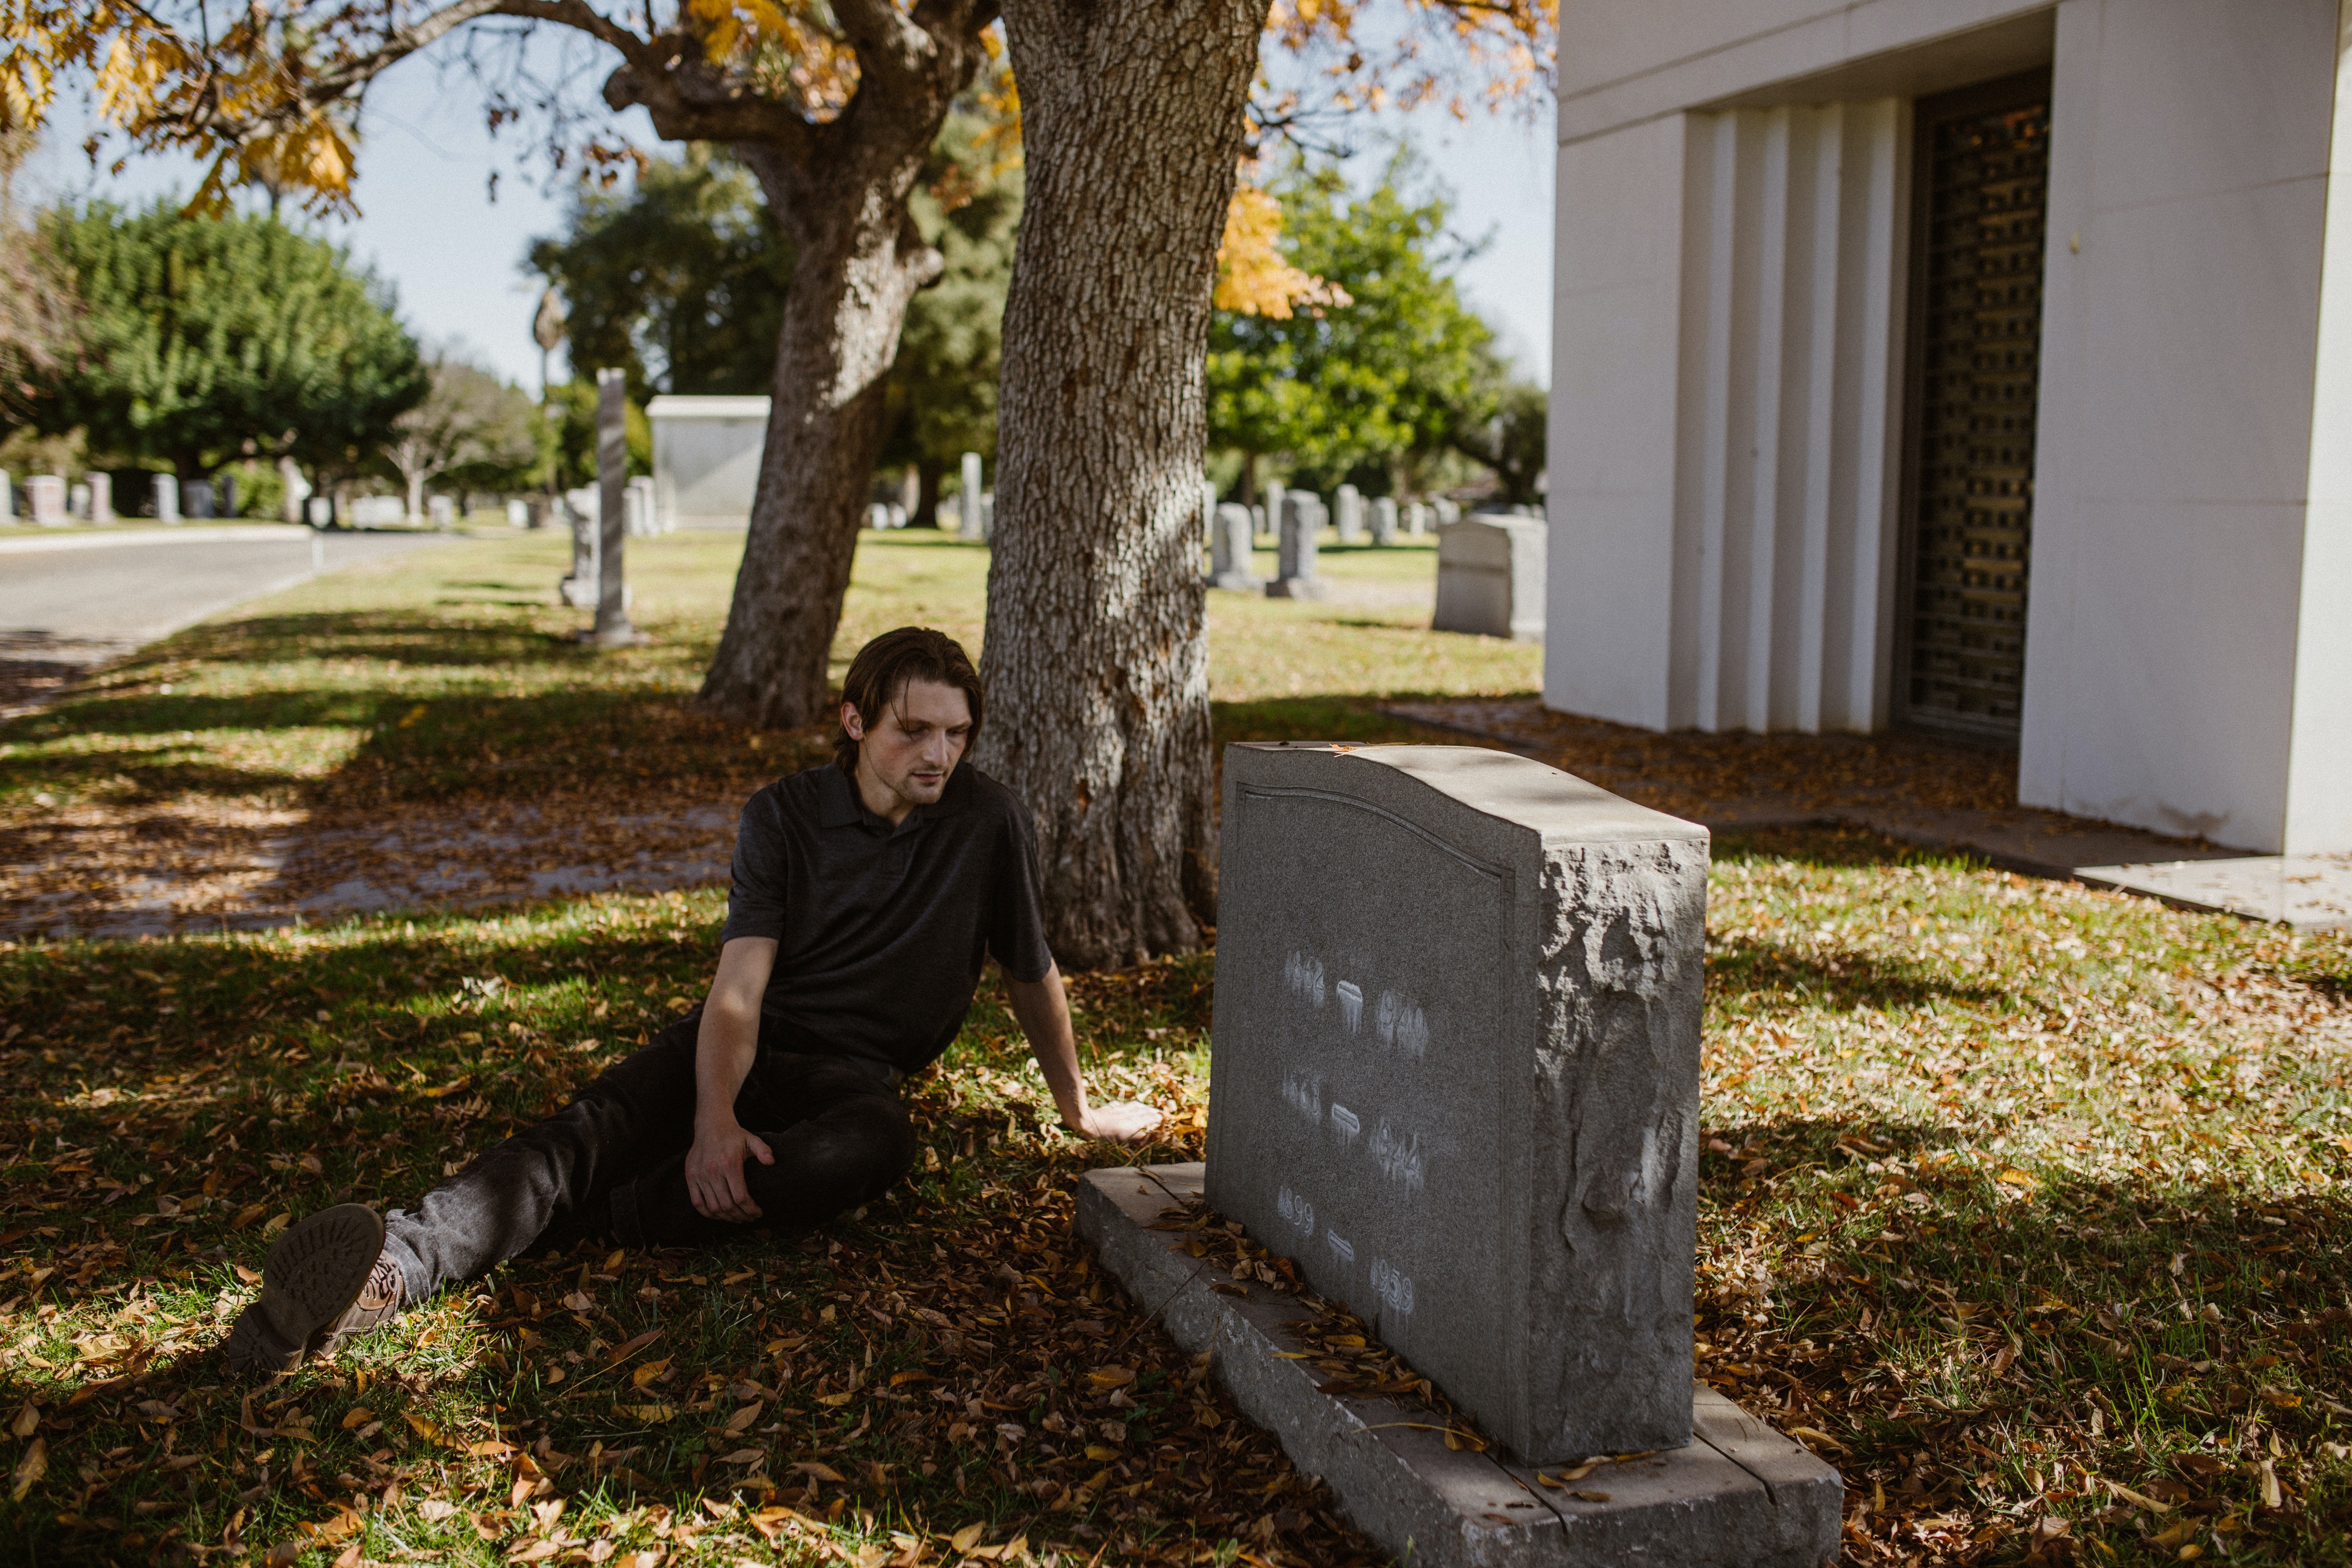 Nikki was shocked when she spotted Samuel's look-alike at the cemetery. | Source: Pexels